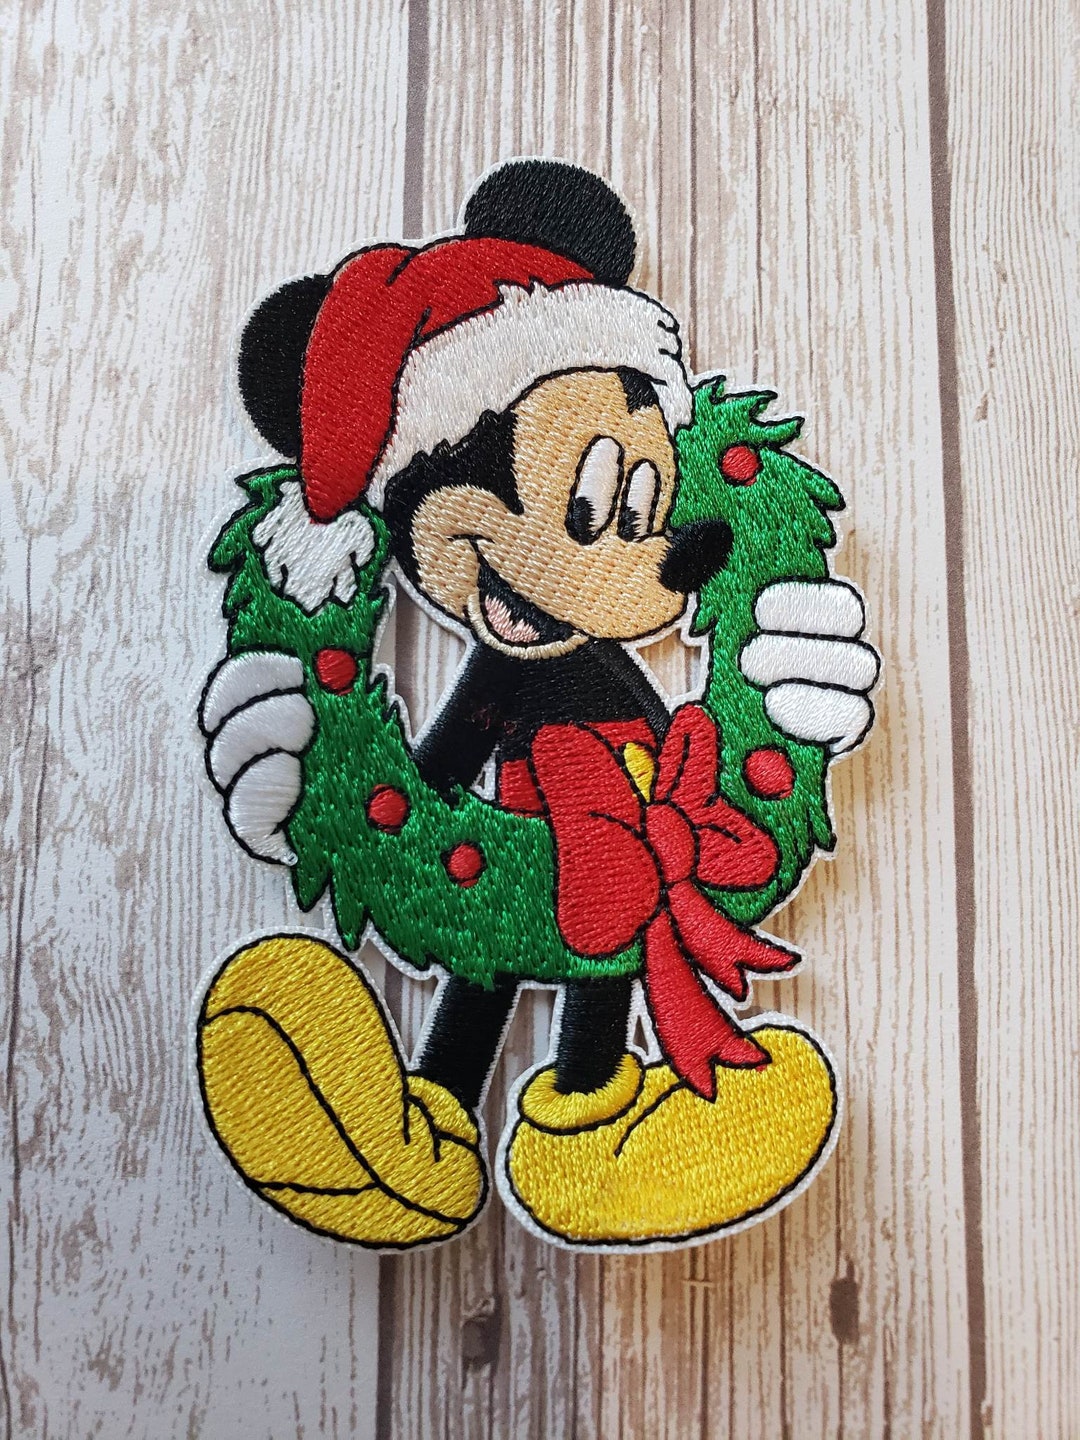 Mickey Minnie Mouse Iron on Patches for Clothing Heat-adhesive Patches for  Clothes Sweatshirt Hoodies Boys and Girls Clothing